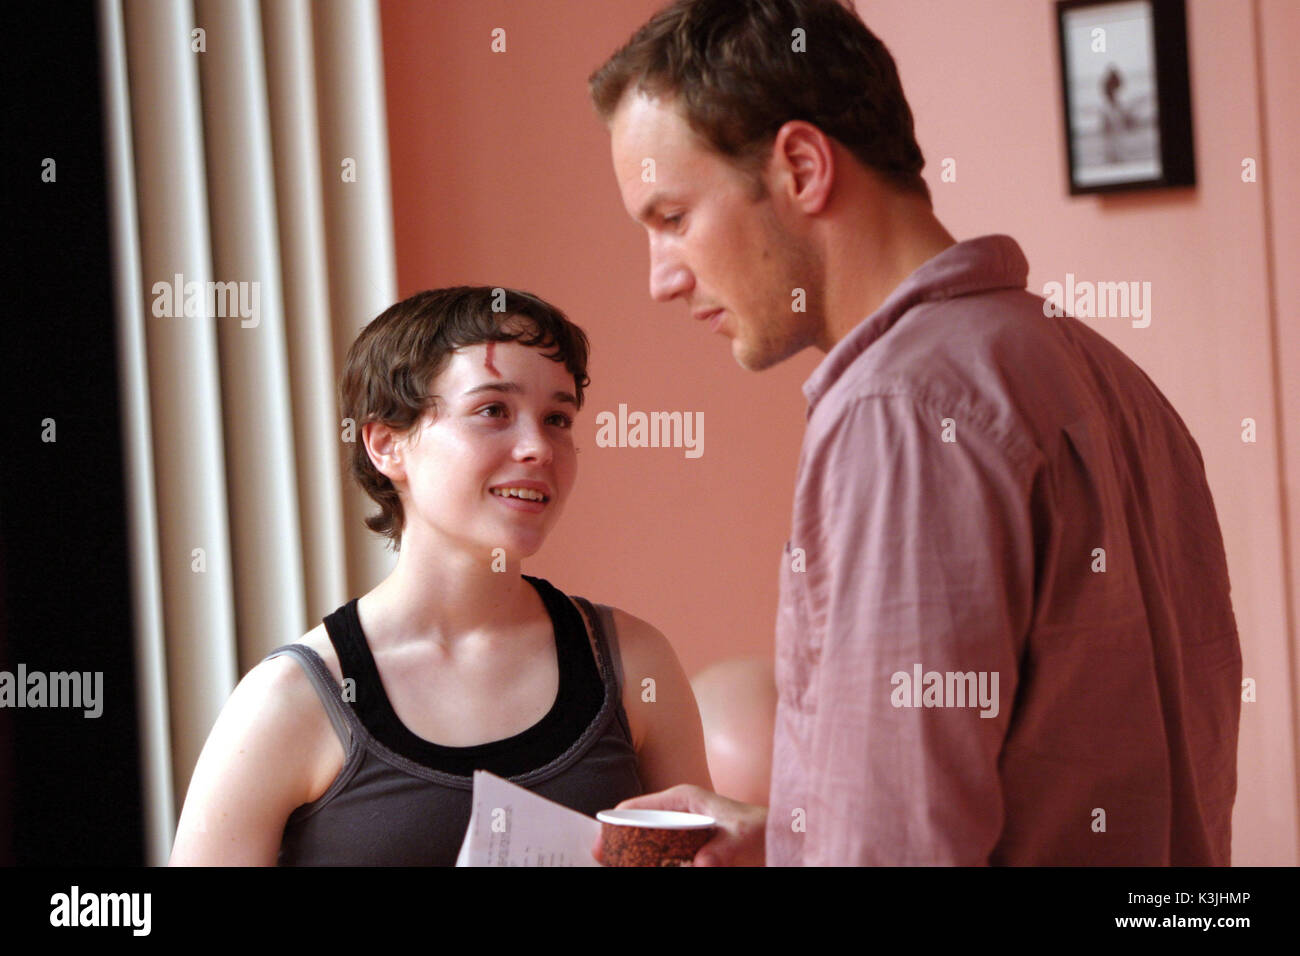 HARD CANDY ELLEN PAGE, PATRICK WILSON HARD CANDY ELLEN PAGE, PATRICK WILSON  *** Local Caption *** NOT A SCENE FROM THE FILM Date: 2005 Stock Photo -  Alamy